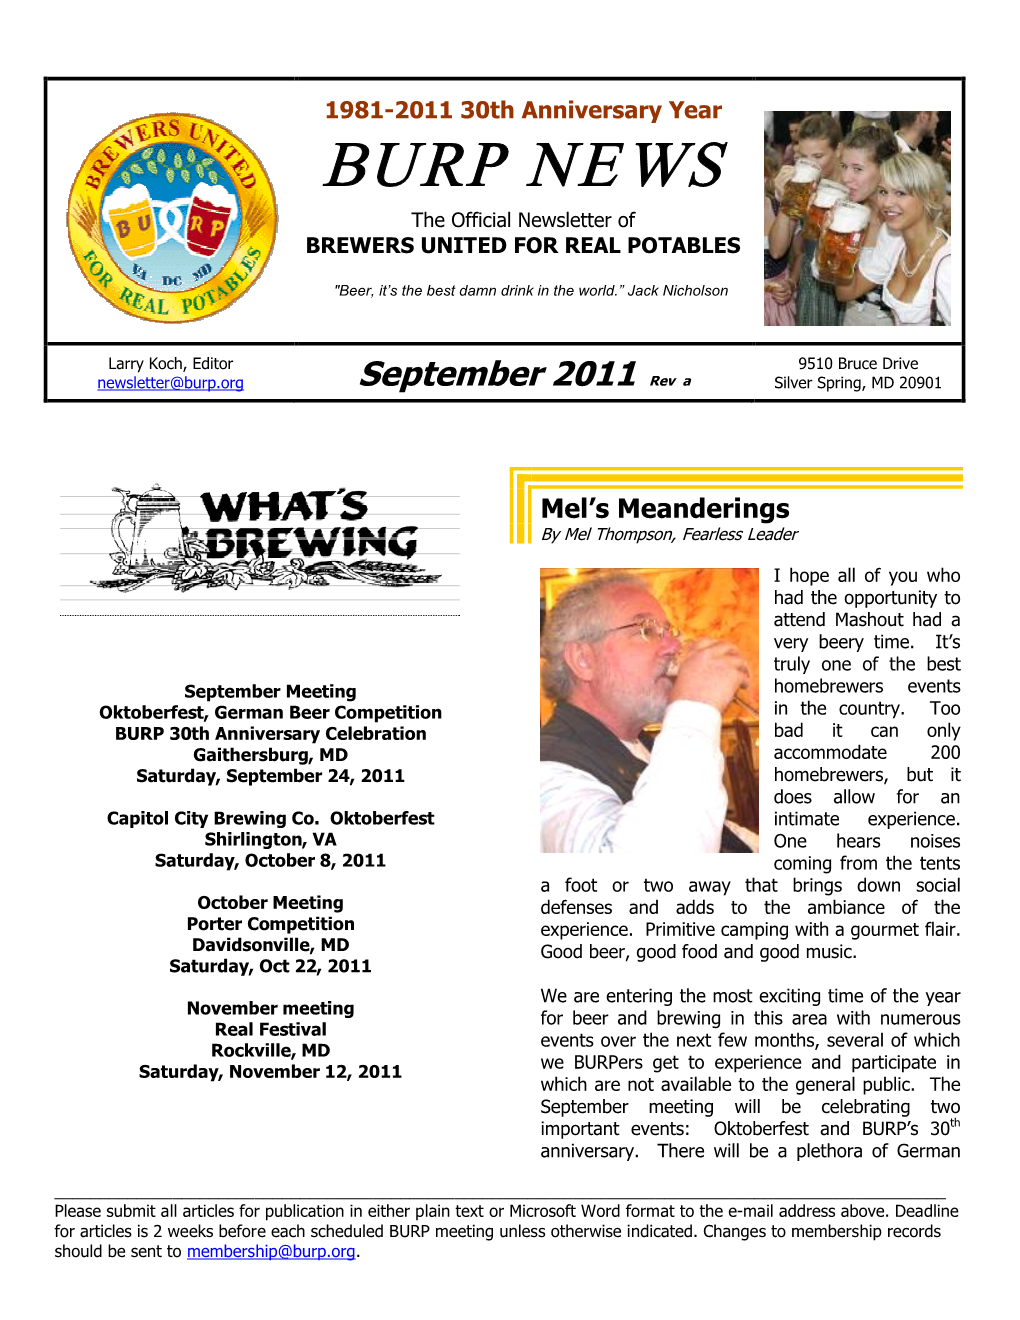 BURP NEWS the Official Newsletter of BREWERS UNITED for REAL POTABLES